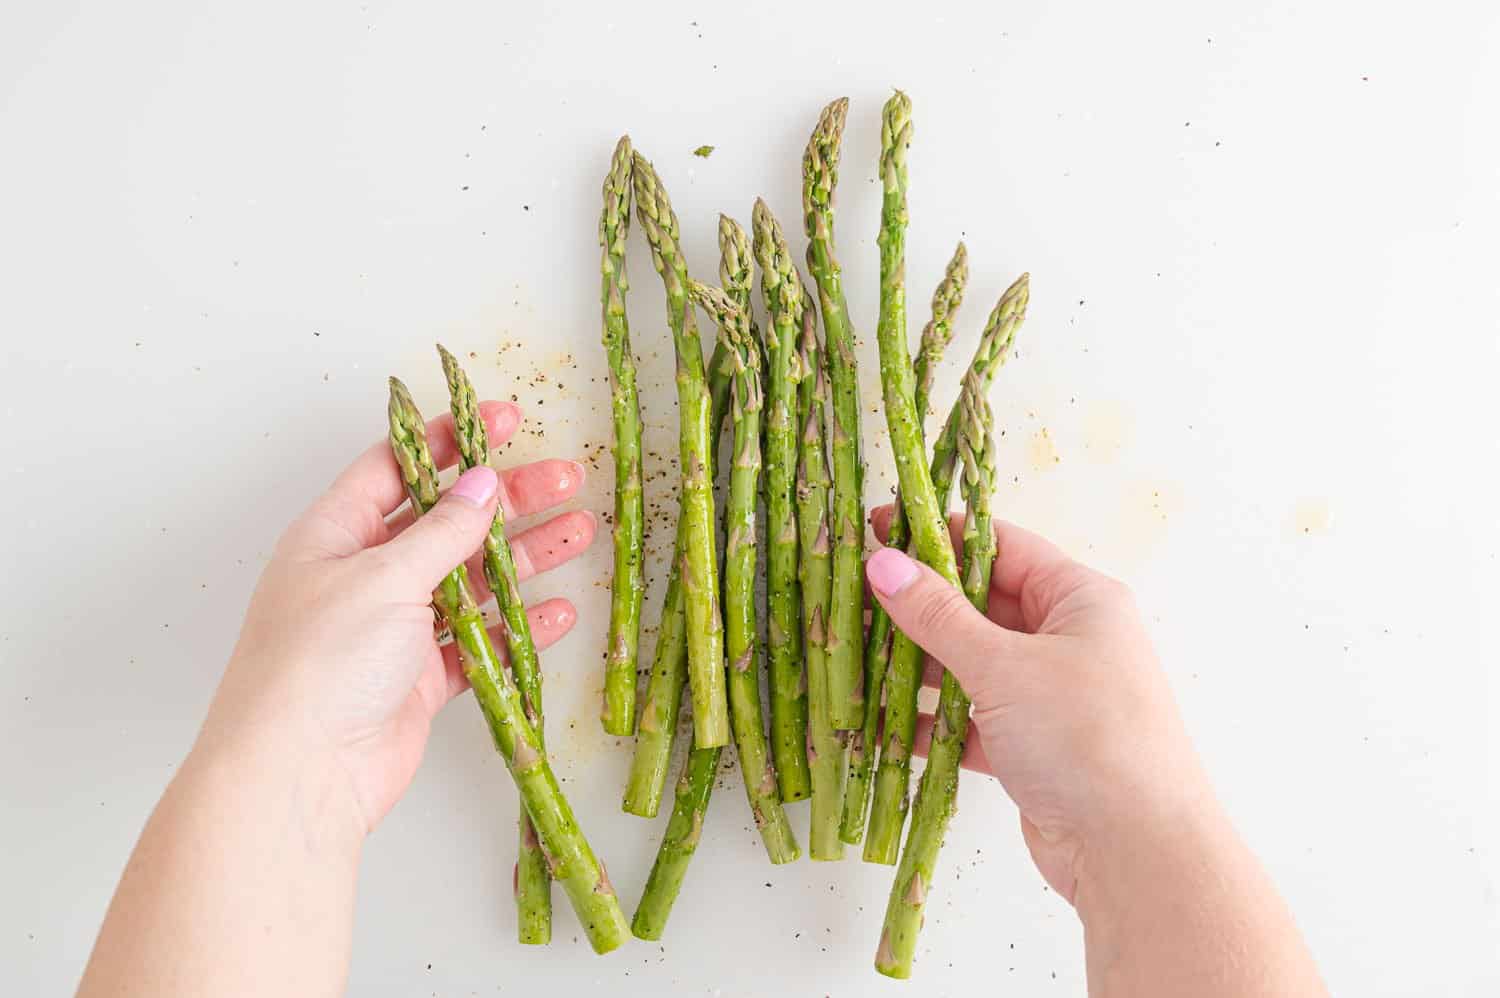 Asparagus being tossed with seasoning.